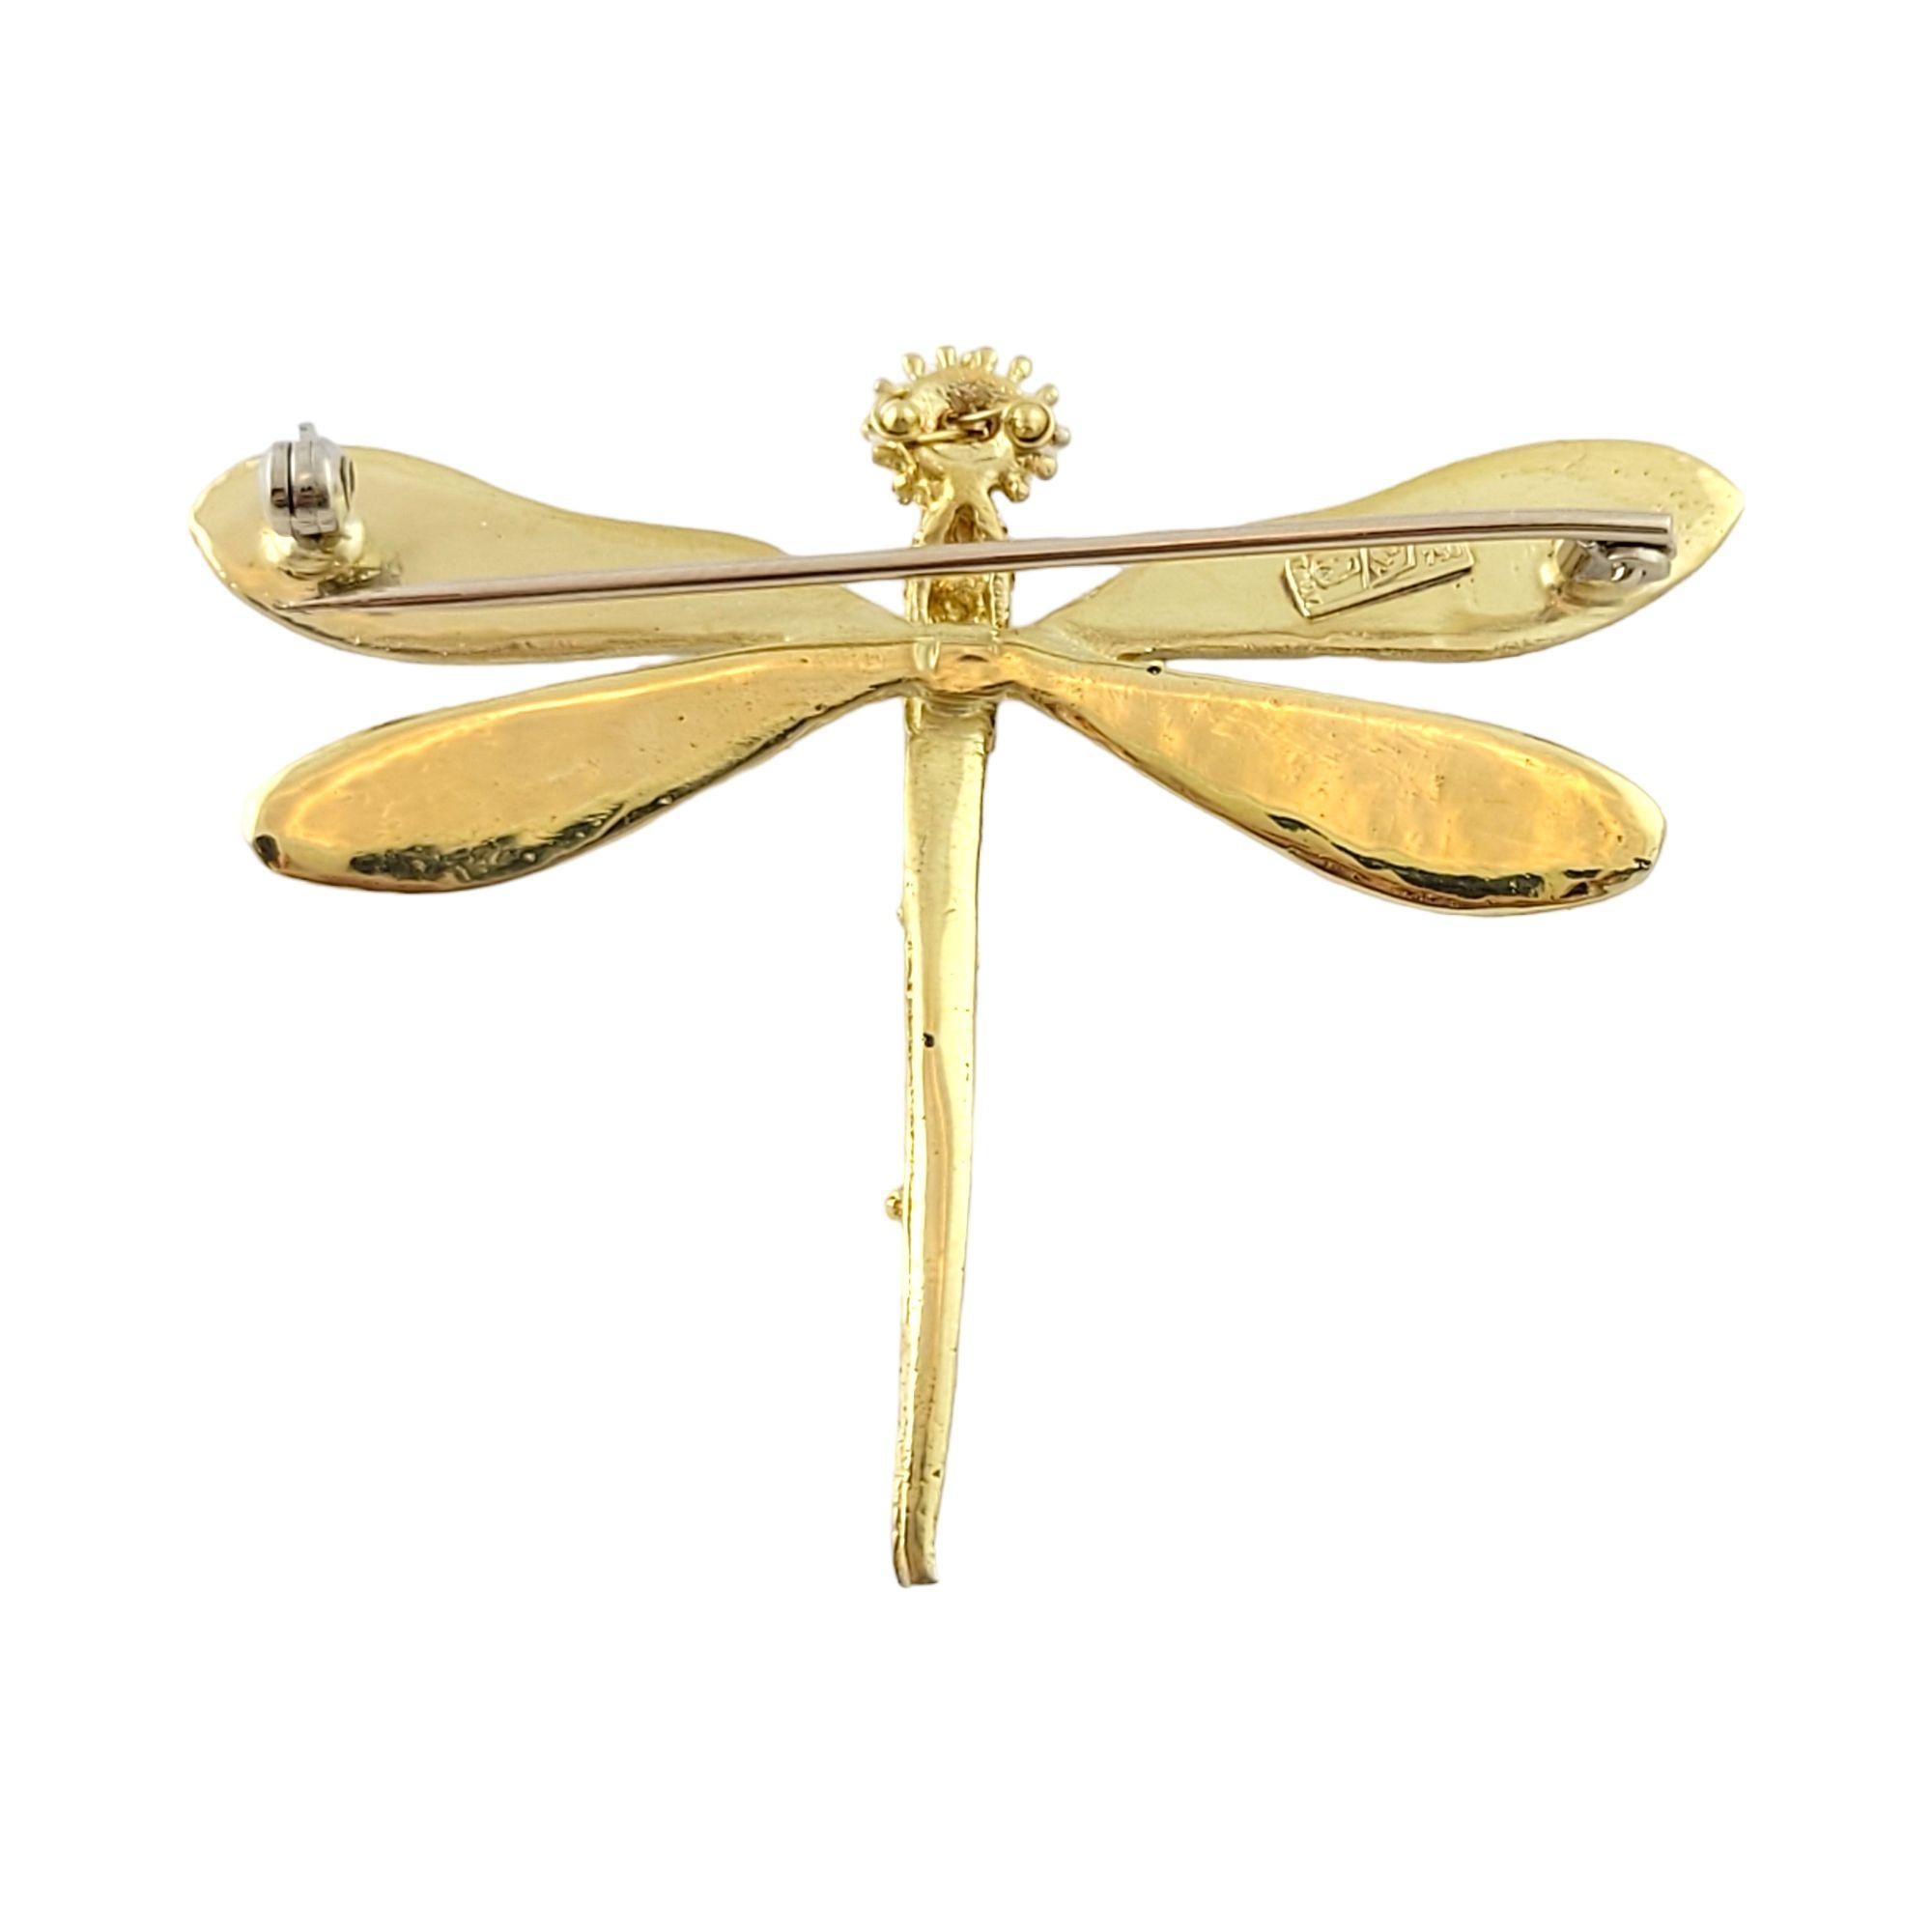 Vintage 18K Yellow Gold & Enamel Dragonfly Pin

Gorgeous 18K gold dragonfly pin with beautiful enamel wings and 2 pearls as eyes!

2 Pearls: 3mm each

Size: 44mm X 54mm X 6mm

Weight: 11.7 g/ 7.5 dwt

Hallmark: Italy AL419 K18 750

Very good